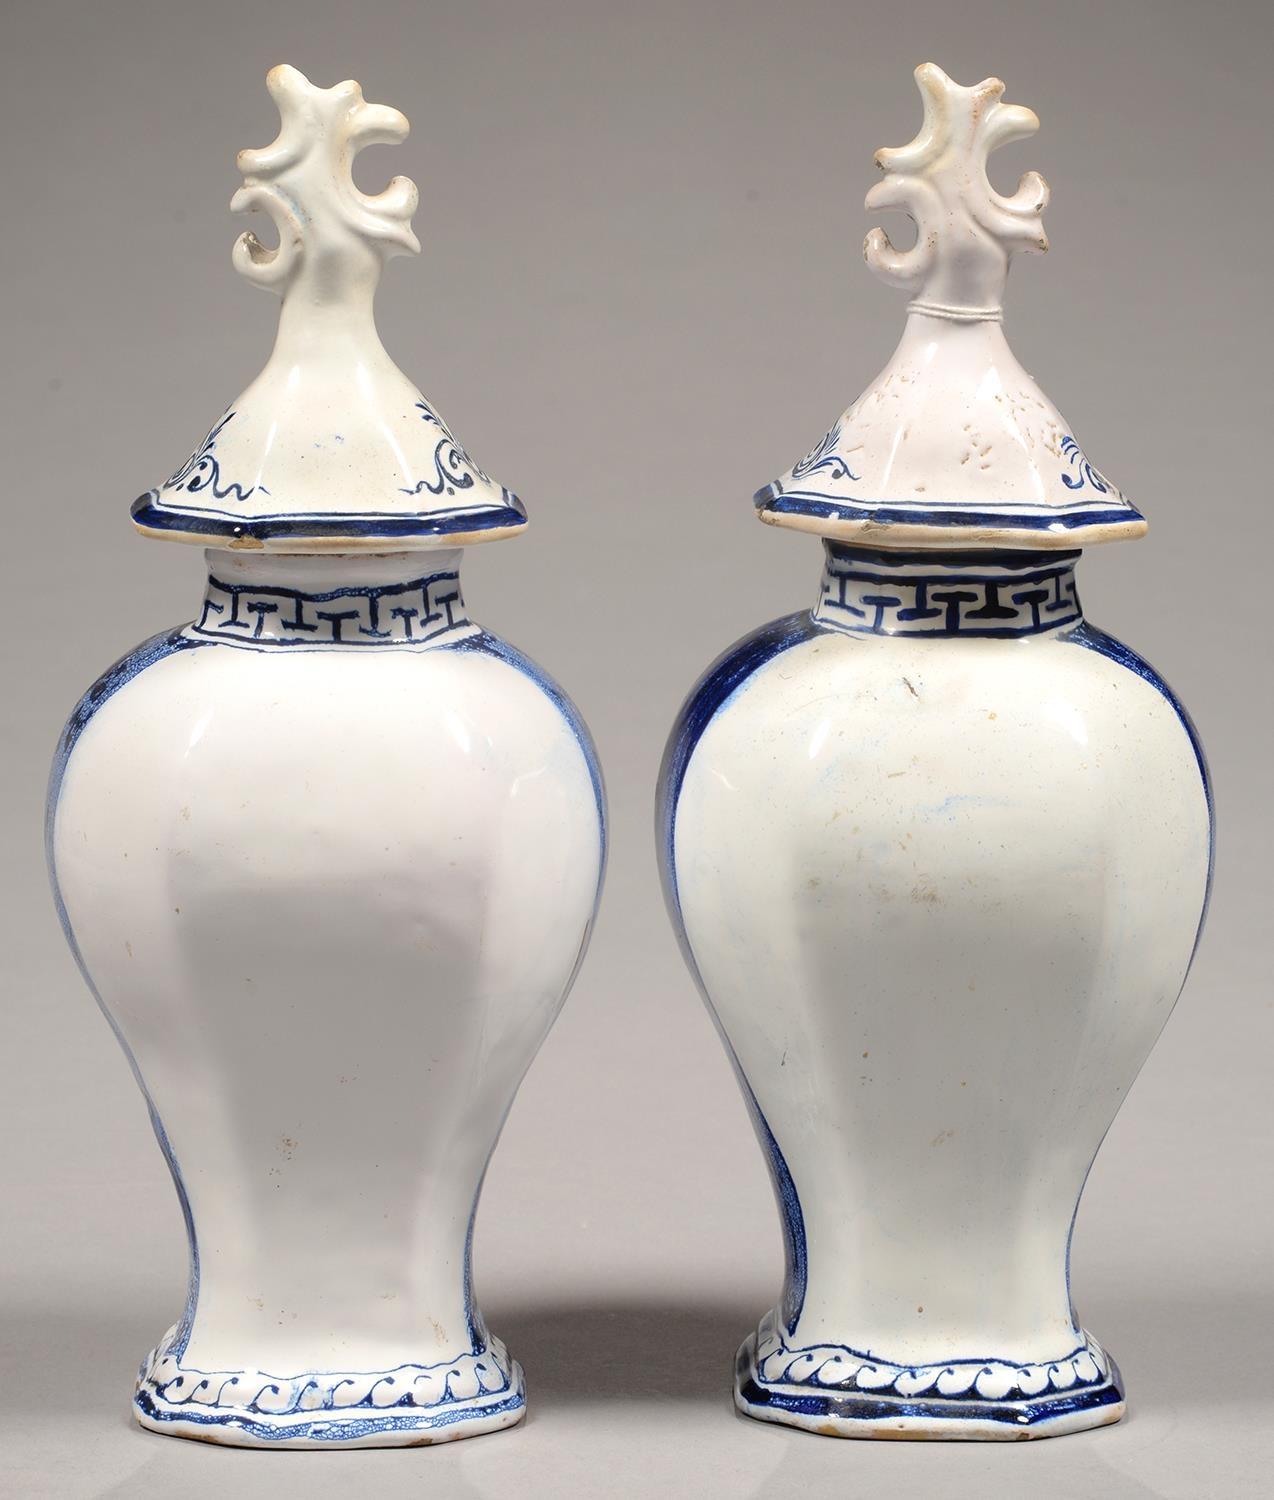 TWO DUTCH DELFTWARE VASES AND COVERS, THE VASES PAINTED WITH A LADY OR GENTLEMAN, 33CM H, 19TH C - Image 2 of 2